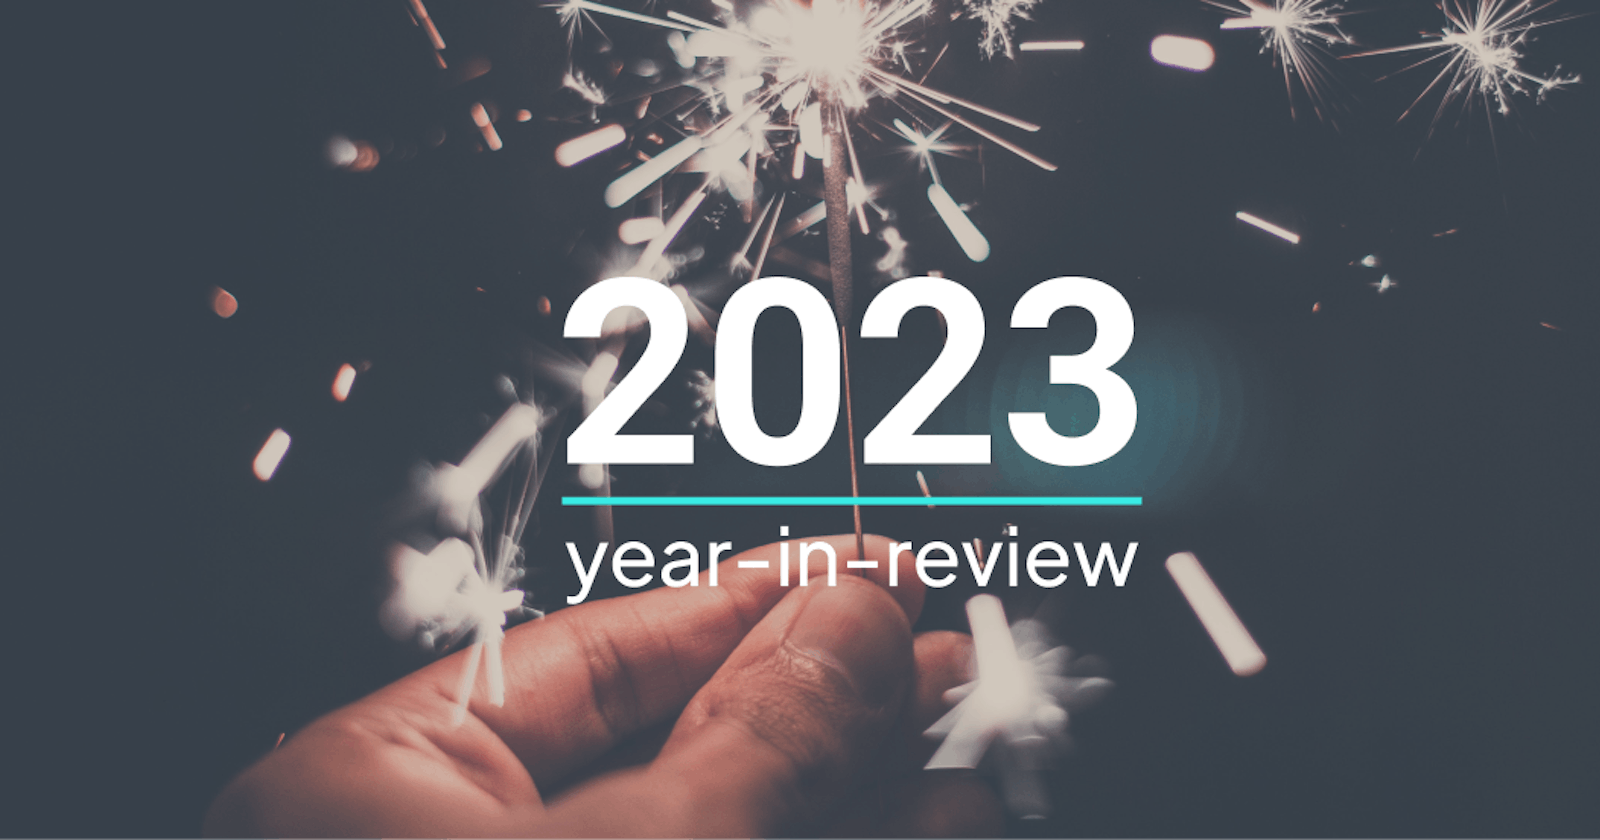 2023 year-in-review